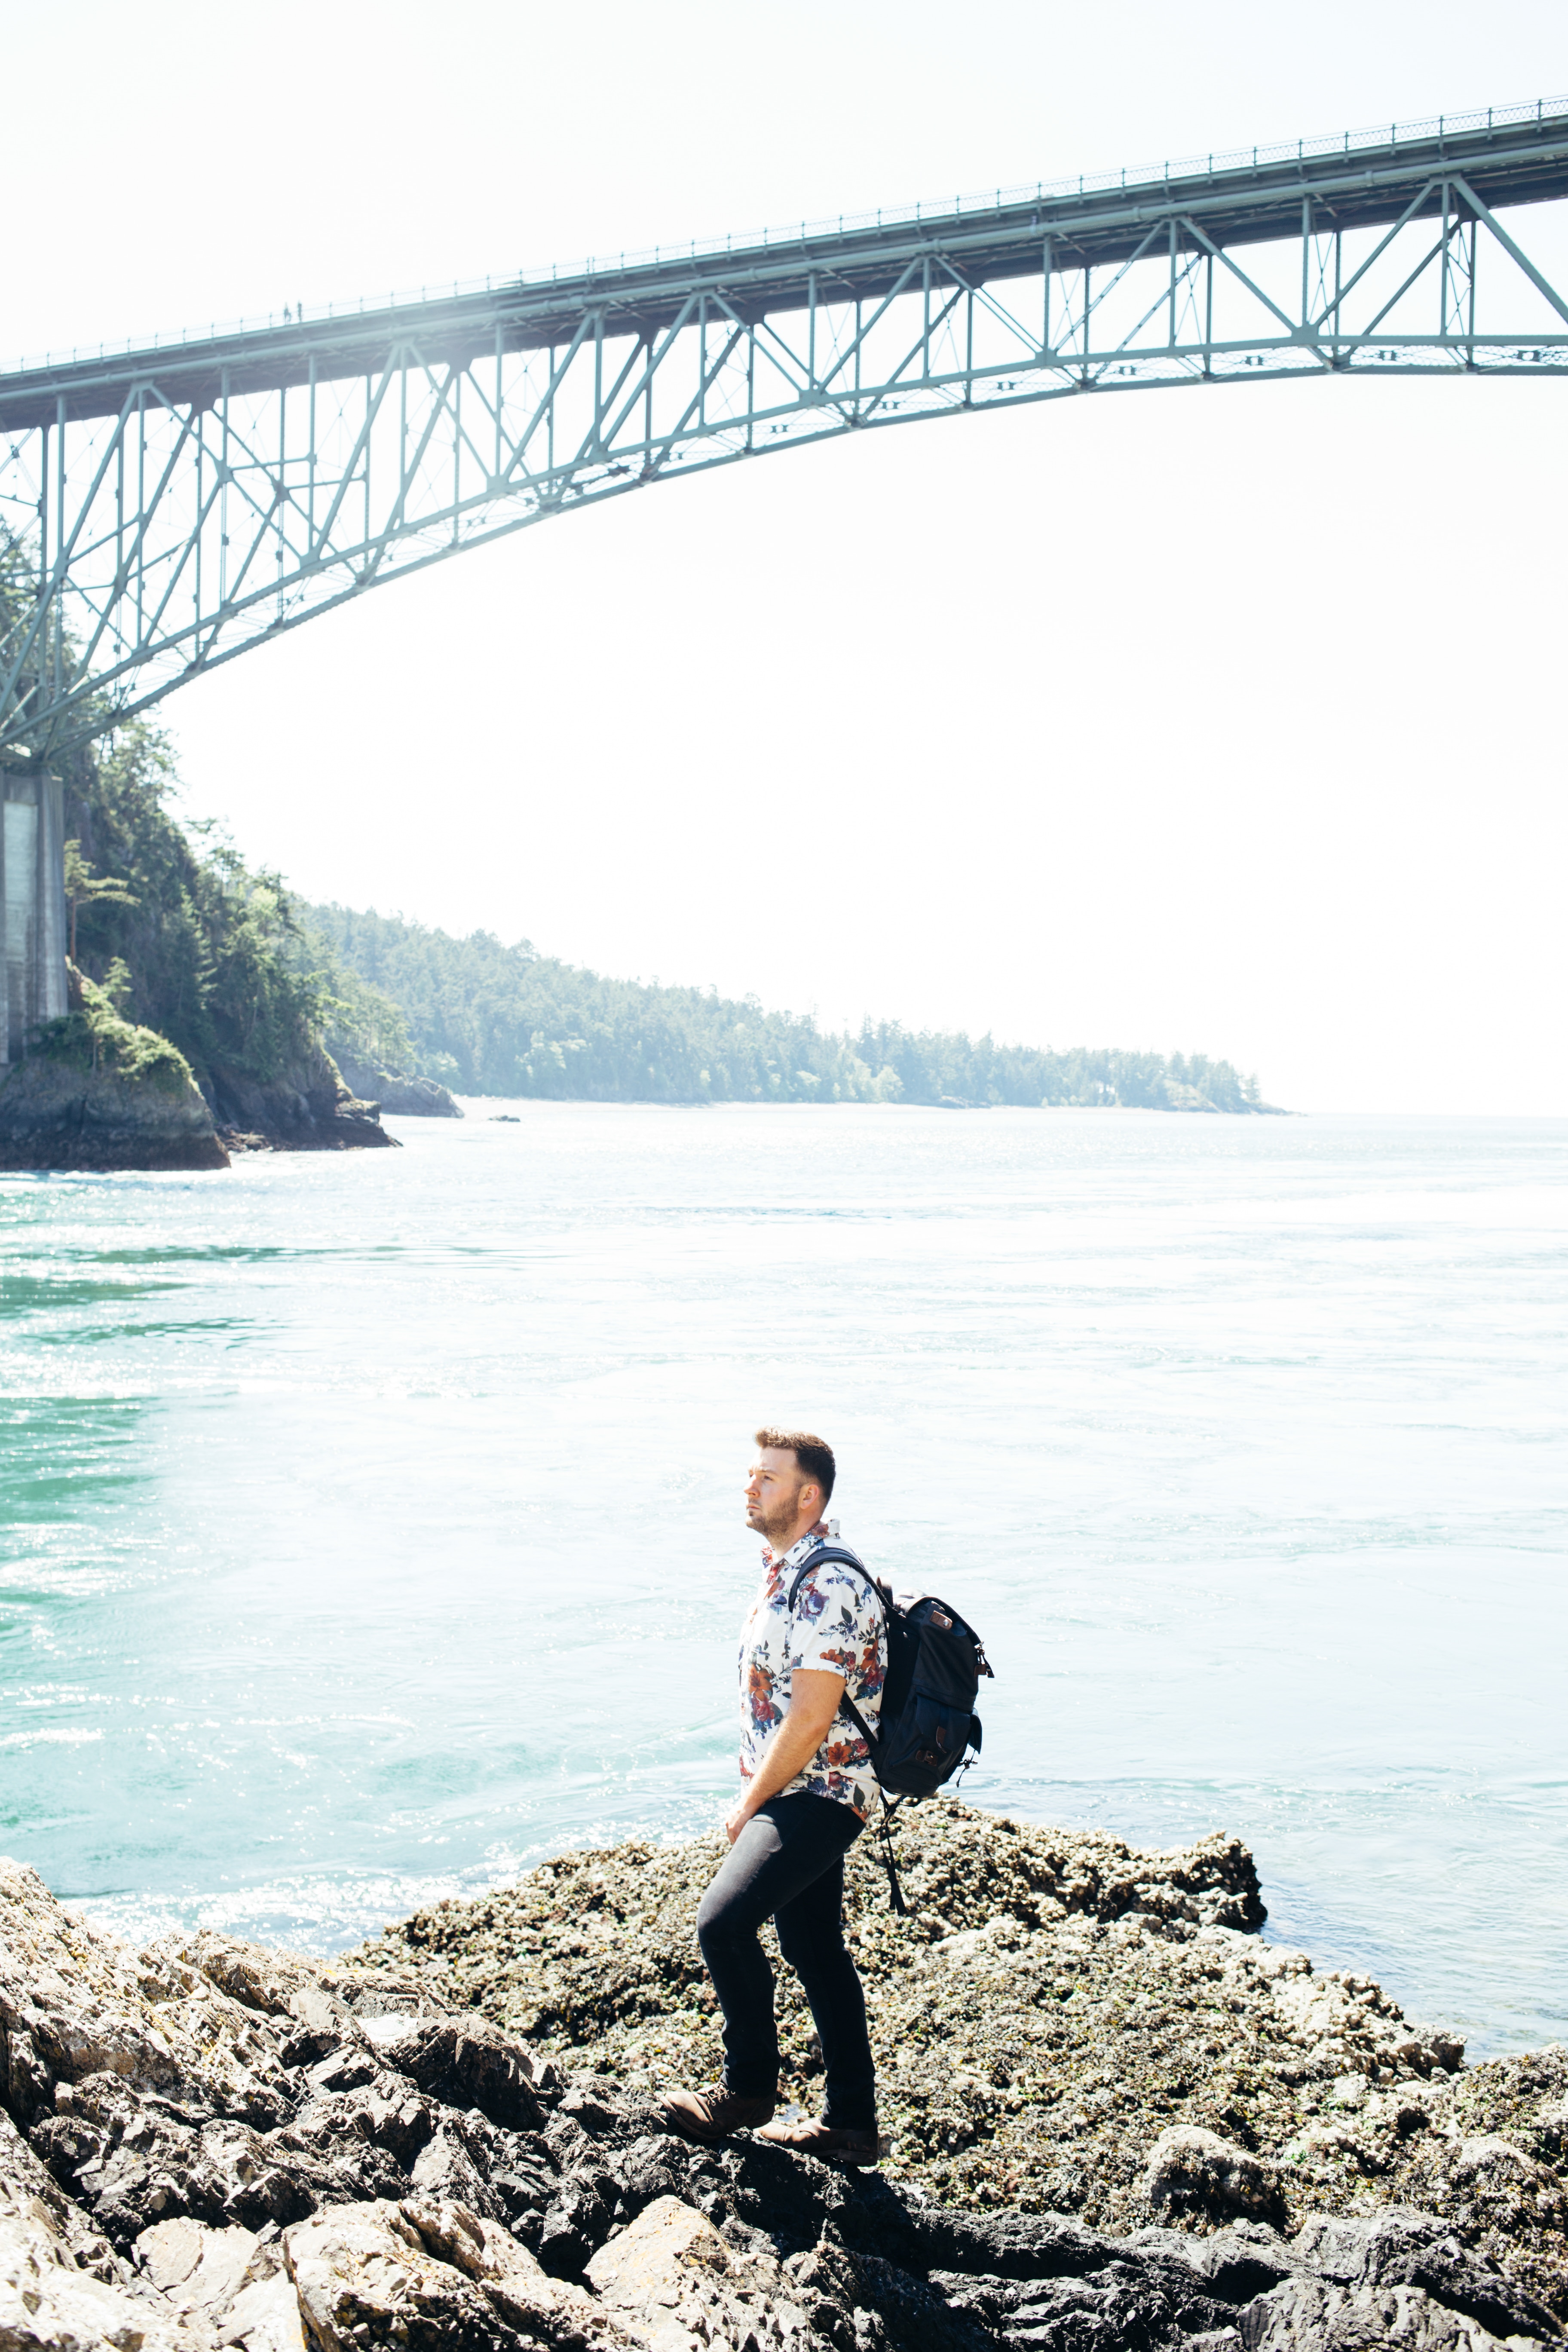 man with black backpack with bridge above him